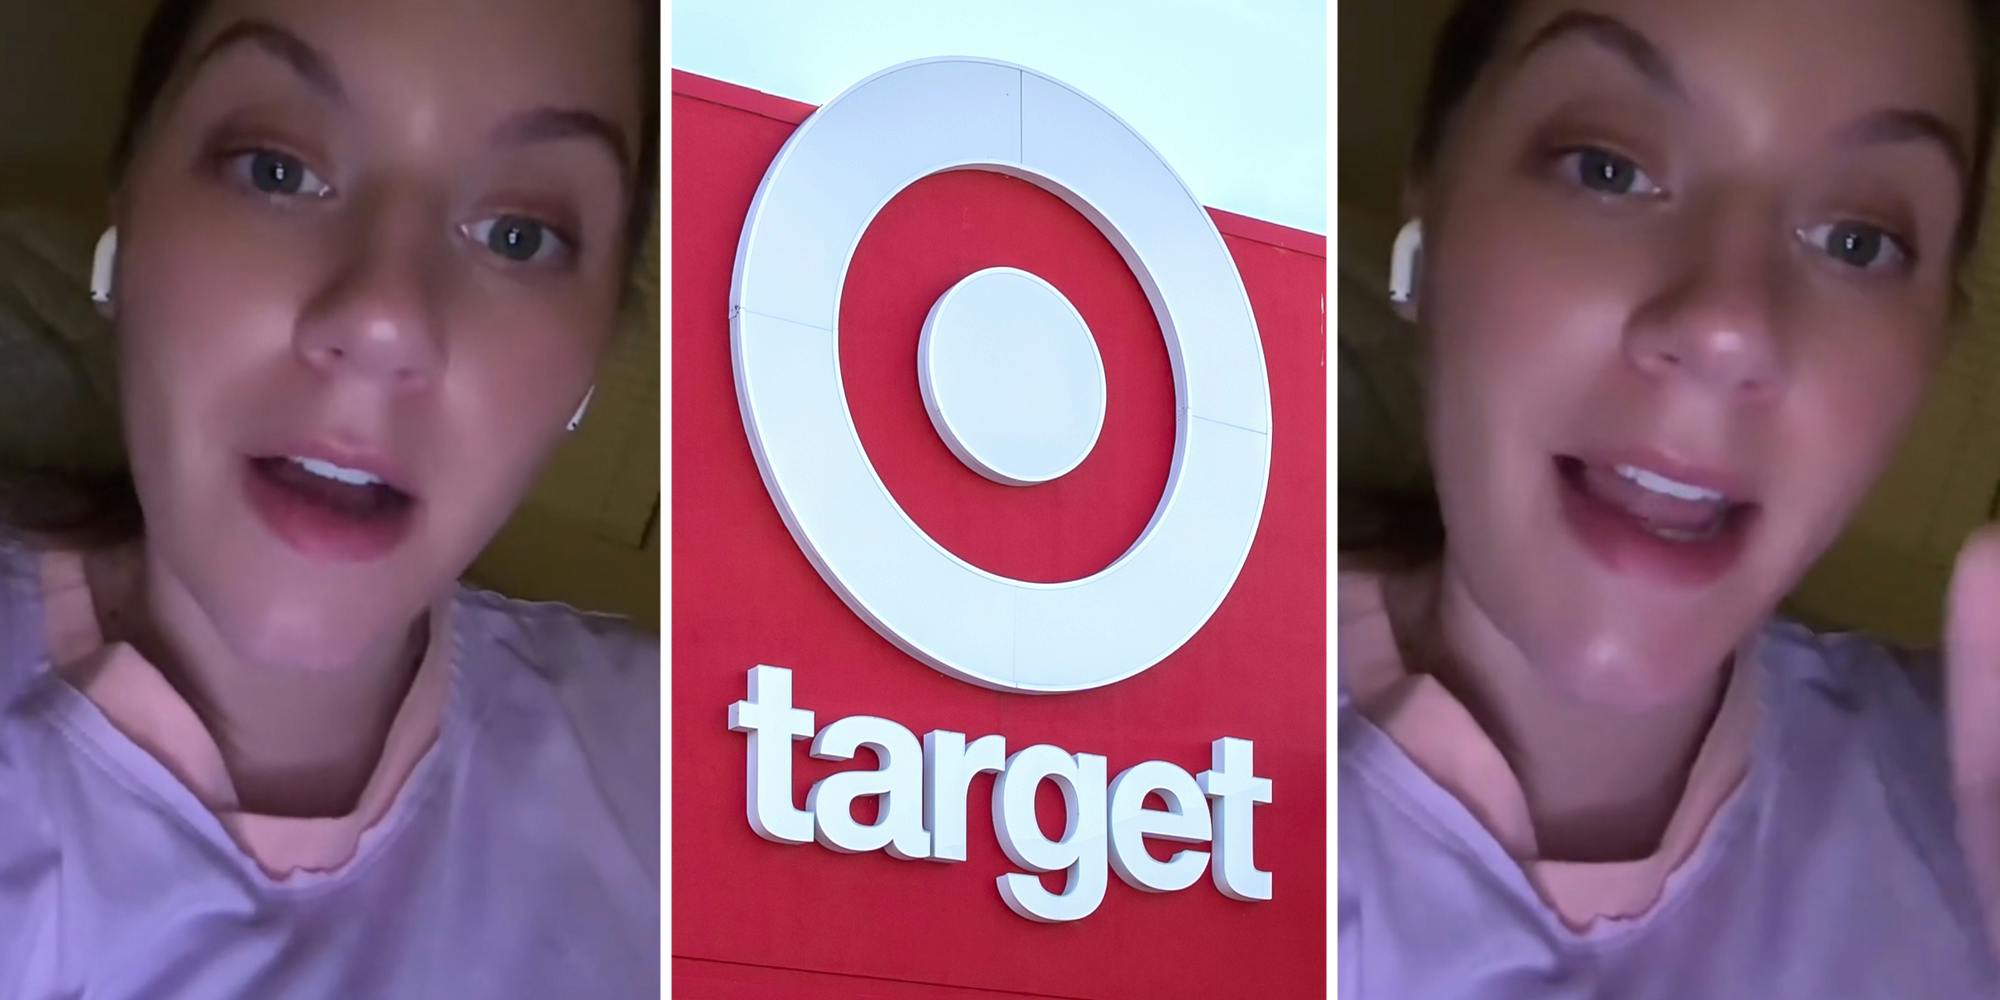 ‘People send that guy money to help people’: Target shopper catches influencer ‘blessing’ a customer with money. There’s just one problem